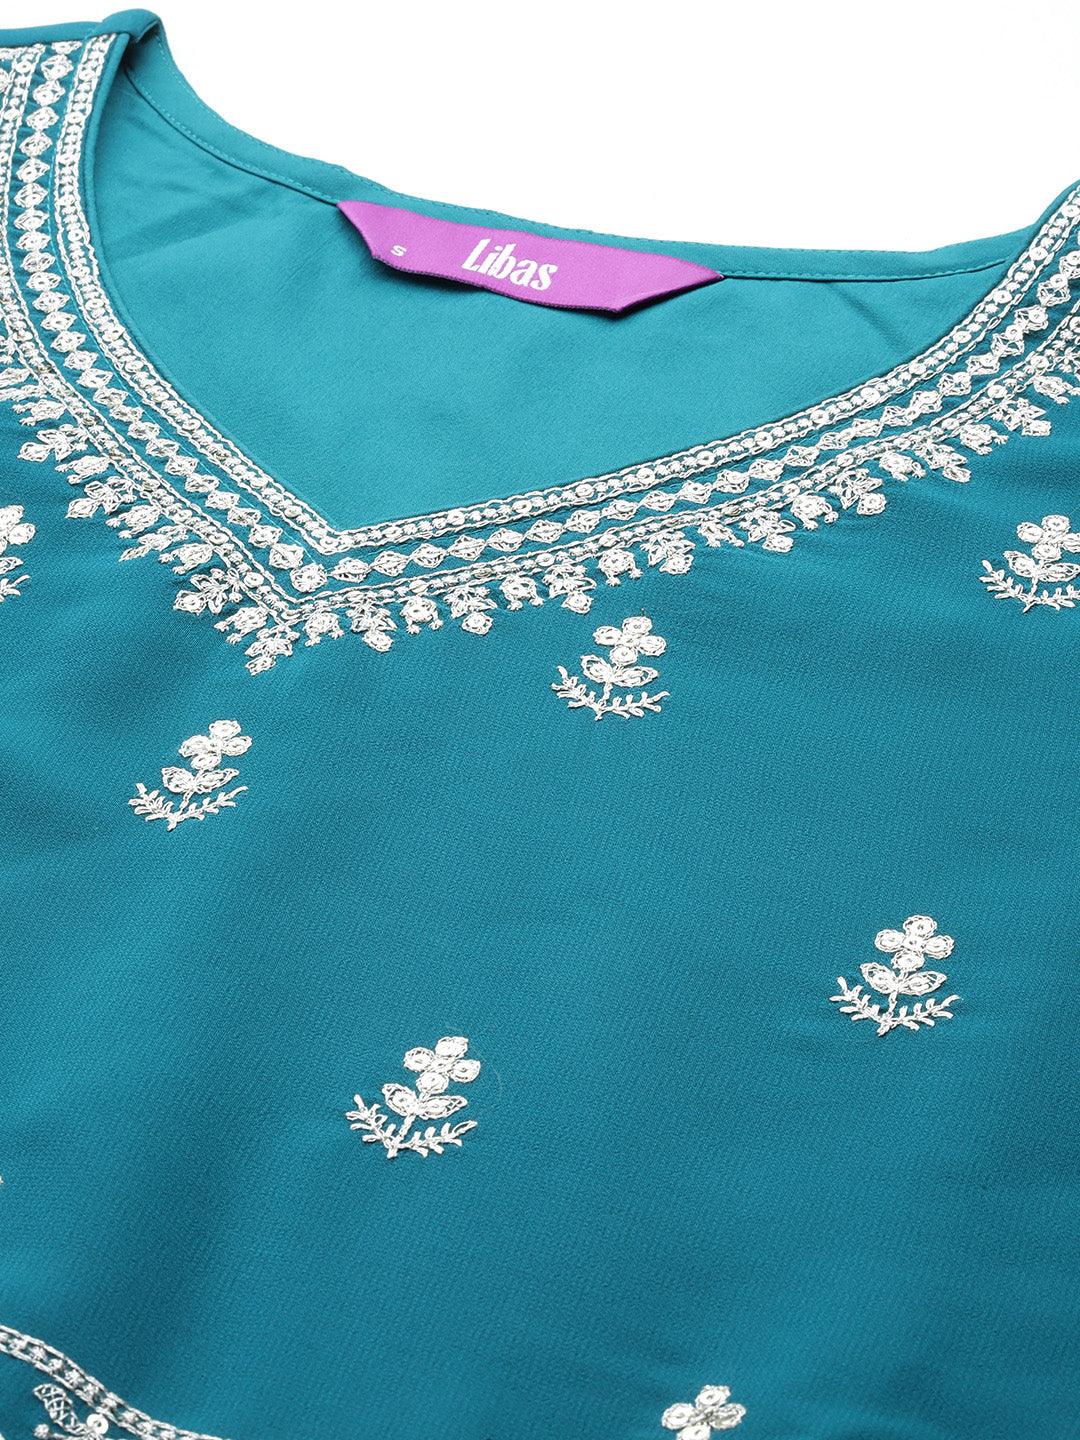 Turquoise Embroidered Georgette A-Line Kurta With Palazzos & Dupatta - Libas